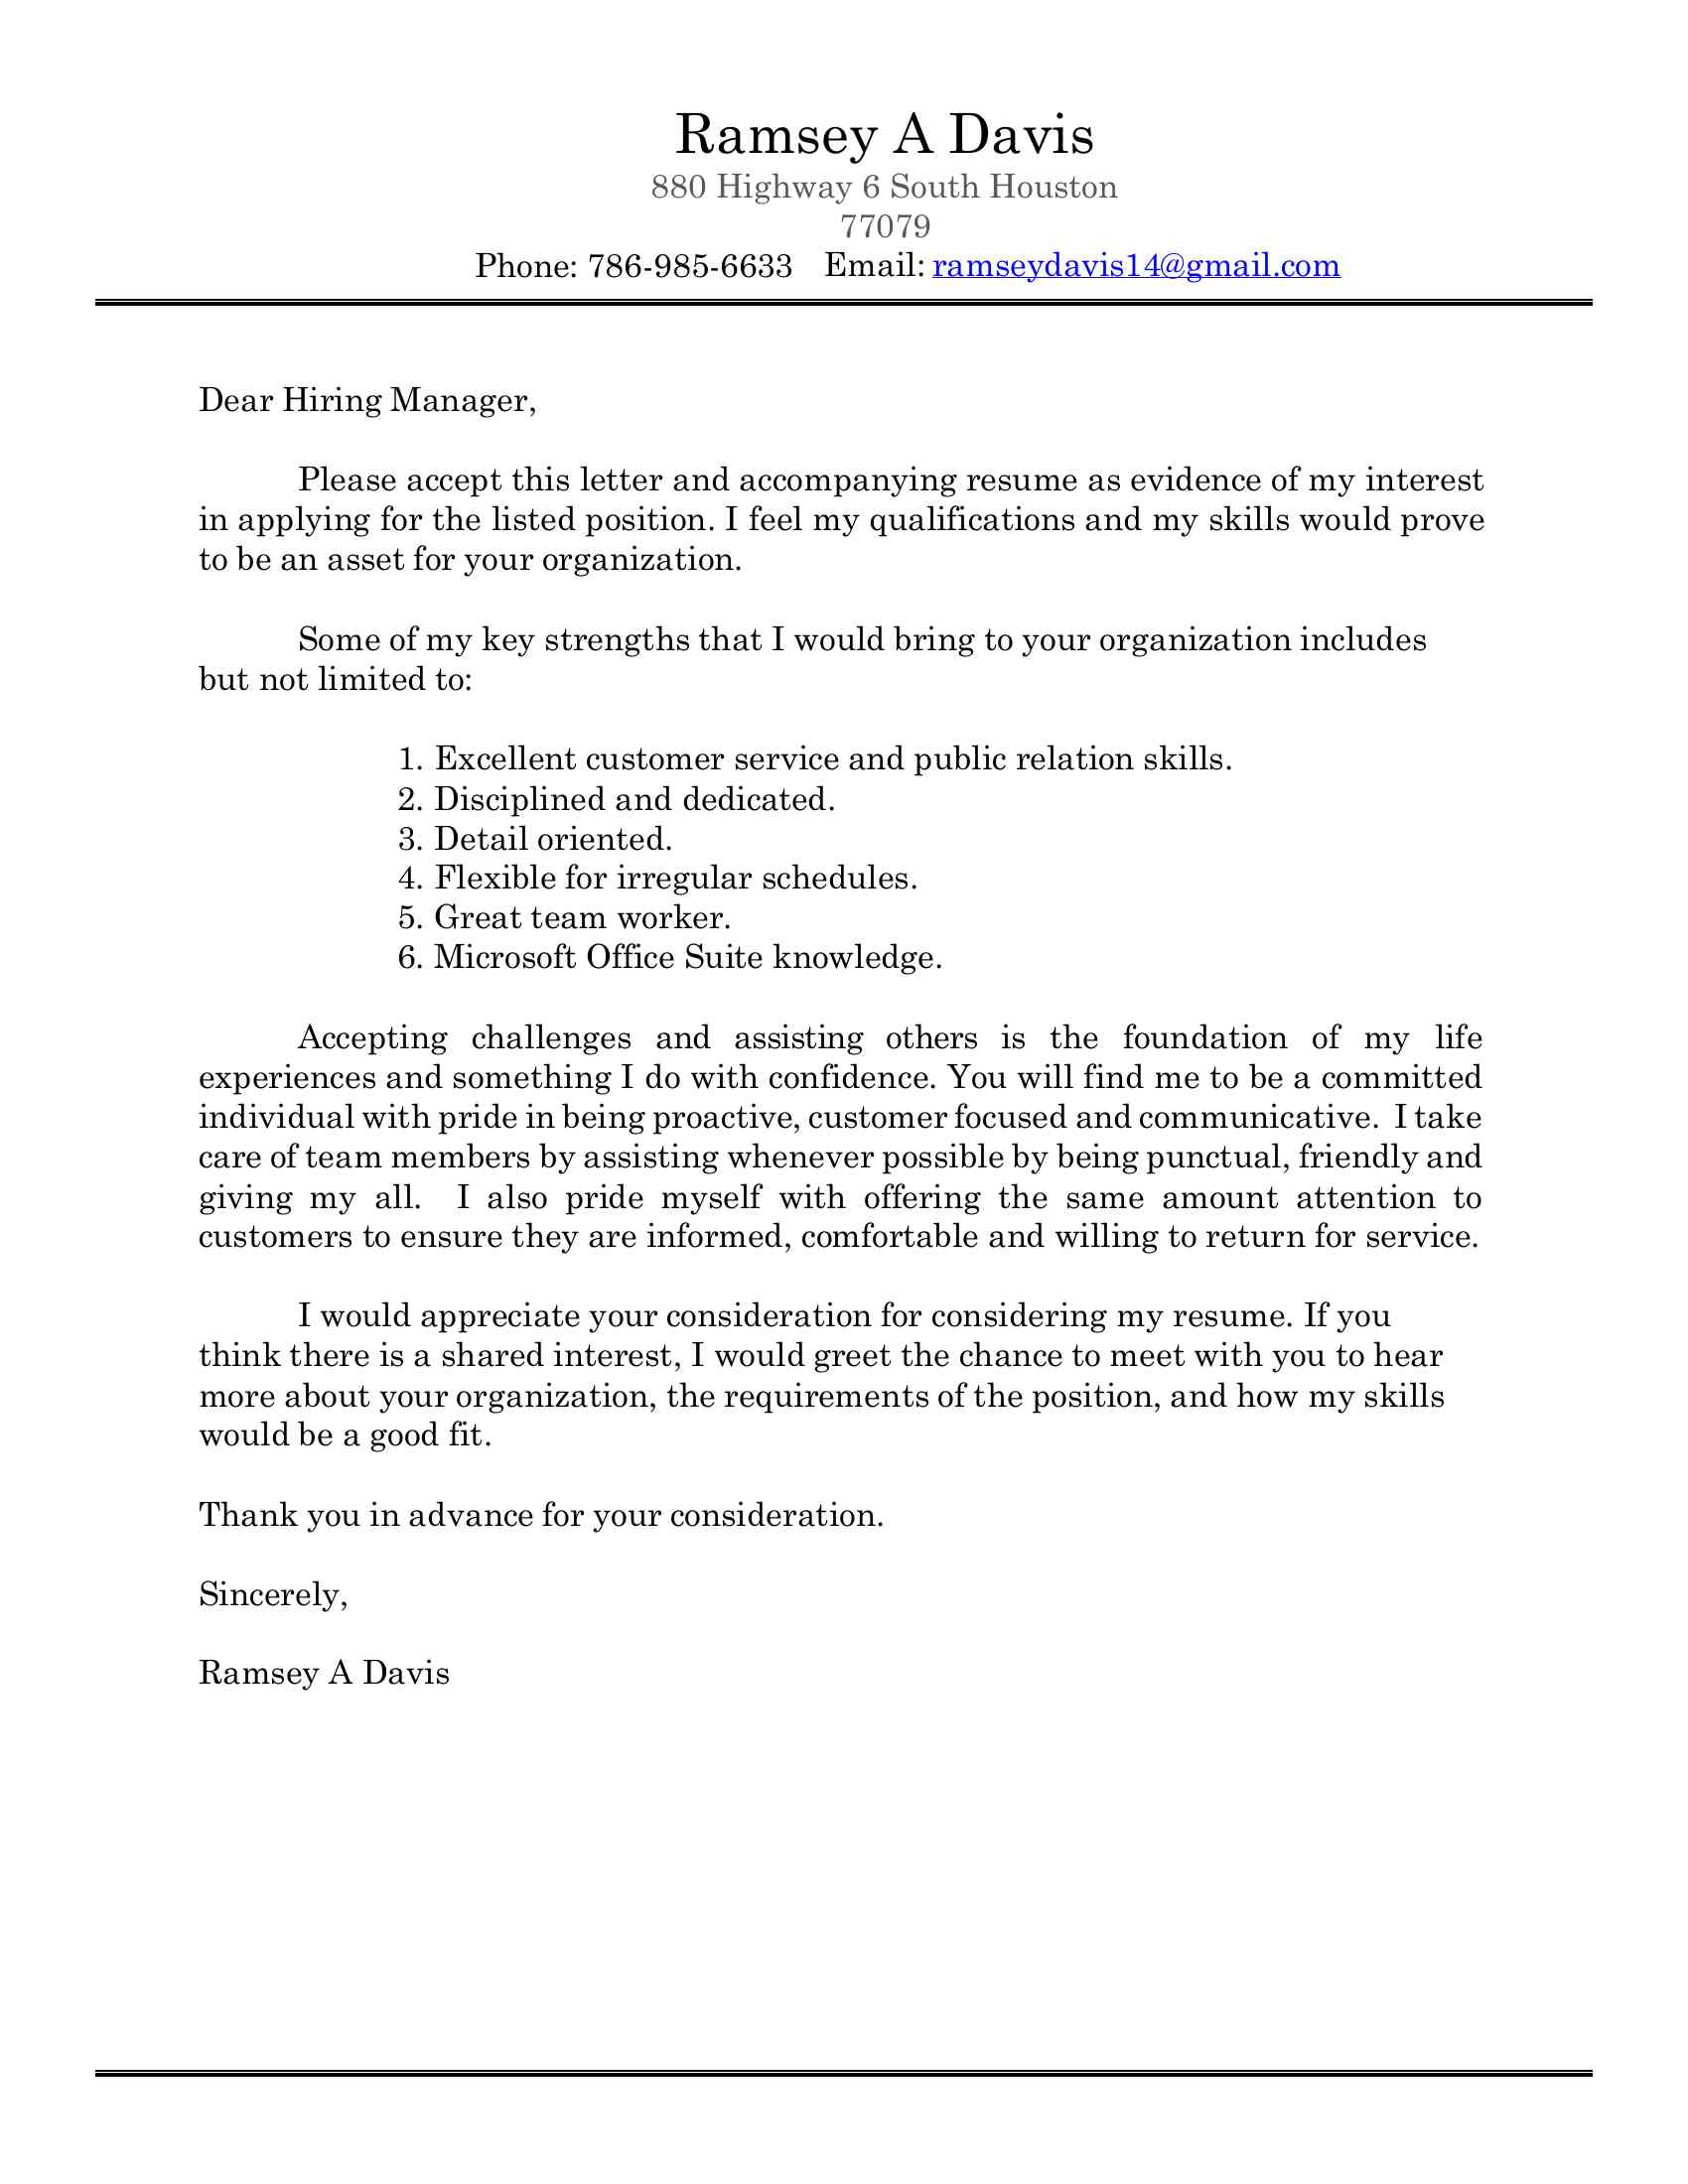 Ramsey A Davis <BR>880 Highway 6 South Houston <BR>77079 <BR>Phone: (XXX) XXX-XXXX Email: XXXX@XXXX.XXX Dear Hiring Manager, Please accept this letter and accompanying resume as evidence of my interest <BR>in applying for the listed position. I feel my qualifications and my skills would prove <BR>to be an asset for your organization. Some of my key strengths that I would bring to your organization includes <BR>but not limited to: 1. Excellent customer service and public relation skills. <BR>2. Disciplined and dedicated. <BR>3. Detail oriented. <BR>4. Flexible for irregular schedules. <BR>5. Great team worker. <BR>6. Microsoft Office Suite knowledge. Accepting challenges and assisting others is the foundation of my life <BR>experiences and something I do with confidence. You will find me to be a committed <BR>individual with pride in being proactive, customer focused and communicative. I take <BR>care of team members by assisting whenever possible by being punctual, friendly and <BR>giving my all.  I also pride myself with offering the same amount attention to <BR>customers to ensure they are informed, comfortable and willing to return for service. I would appreciate your consideration for considering my resume. If you <BR>think there is a shared interest, I would greet the chance to meet with you to hear <BR>more about your organization, the requirements of the position, and how my skills <BR>would be a good fit. Thank you in advance for your consideration. <BR>Sincerely, <BR>Ramsey A Davis Ramsey A Davis <BR>880 Highway 6 South Houston <BR>77079 <BR>Phone: (XXX) XXX-XXXX Email: XXXX@XXXX.XXX SUMMARY OF QUALIFICATIONS <BR>• Working in a fast paced, high volume <BR> Willing to learn and accept constructive <BR>environment. <BR>criticism <BR>• Enthusiastic, hard-working, and reliable <BR> Enjoy contributing to a team effort <BR>• Completing all tasks in a timely, organized <BR> Excellent verbal communication and public <BR>and professional manner.  <BR>relation skills <BR>• Flexibility to work irregular hours <BR> Microsoft Office Suite knowledge <BR>• Able to work closely with other professionals <BR> Public relations and customer service <BR>as part of a team <BR>skills <BR>• Time management <BR> Problem solving WORK EXPERIENCE                EDUCATION / Volunteer Work  <BR>04-2016 – 10-2018 <BR>HR ASSISTANT, YMCA <BR>• Updated and maintained staff bulletin boards & newsletter.  <BR>• Filed electronic and hard copy documents.  <BR>• Handled employee time off requests and grievances.  <BR>• Sent out relevant contractual information.  <BR>• Followed up on all outstanding issues.  <BR>• Prepared high-quality paperwork and documentation.  <BR>• Interpreting HR policies & practices.  <BR>12-2018 – 08-2019 <BR>Pro Services Customer Service, Lowes Home Improvement <BR>• <BR>Managing performance <BR>• <BR>Delivering the best possible customer experience <BR>• <BR>Greeting customers, clarifying needs and identifying solutions <BR>• <BR>Closing sales <BR>• <BR>Down stocking, front facing, area recovery <BR>• <BR>Communicate to the team in an inspirational manner <BR>• <BR>Operated a variety of heavy-duty machinery i.e. forklift, star wars, <BR>12-2019 – CURRENT <BR>GUEST SERVICES MANAGER, TOPGOLF MIAMI-DORAL <BR>• Build a strong Guest Services team  <BR>• scheduling, associate training, and team building <BR>• Uphold operating standards and drive Guest safety and satisfaction  <BR>• Ensure all Guest areas are staffed and functioning efficiently  <BR>• follow-up on the completion of tasks  Ramsey A Davis <BR>880 Highway 6 South Houston <BR>77079 <BR>Phone: (XXX) XXX-XXXX Email: XXXX@XXXX.XXX <BR>Education    04/2017 – 07/2020  Florida International University, Miami, FL; Bachelors <BR>   08/2011 – 06/2015  Kestrel Heights High, North Carolina, NC; HS Diploma <BR>   05/2014 – 10/2015  YMCA Youth Camp Counselor, North Carolina  Document Outline<BR>SUMMARY OF QUALIFICATIONS<BR>WORK EXPERIENCE<BR>HR ASSISTANT, YMCA<BR>GUEST SERVICES MANAGER, TOPGOLF MIAMI-DORAL<BR>Education